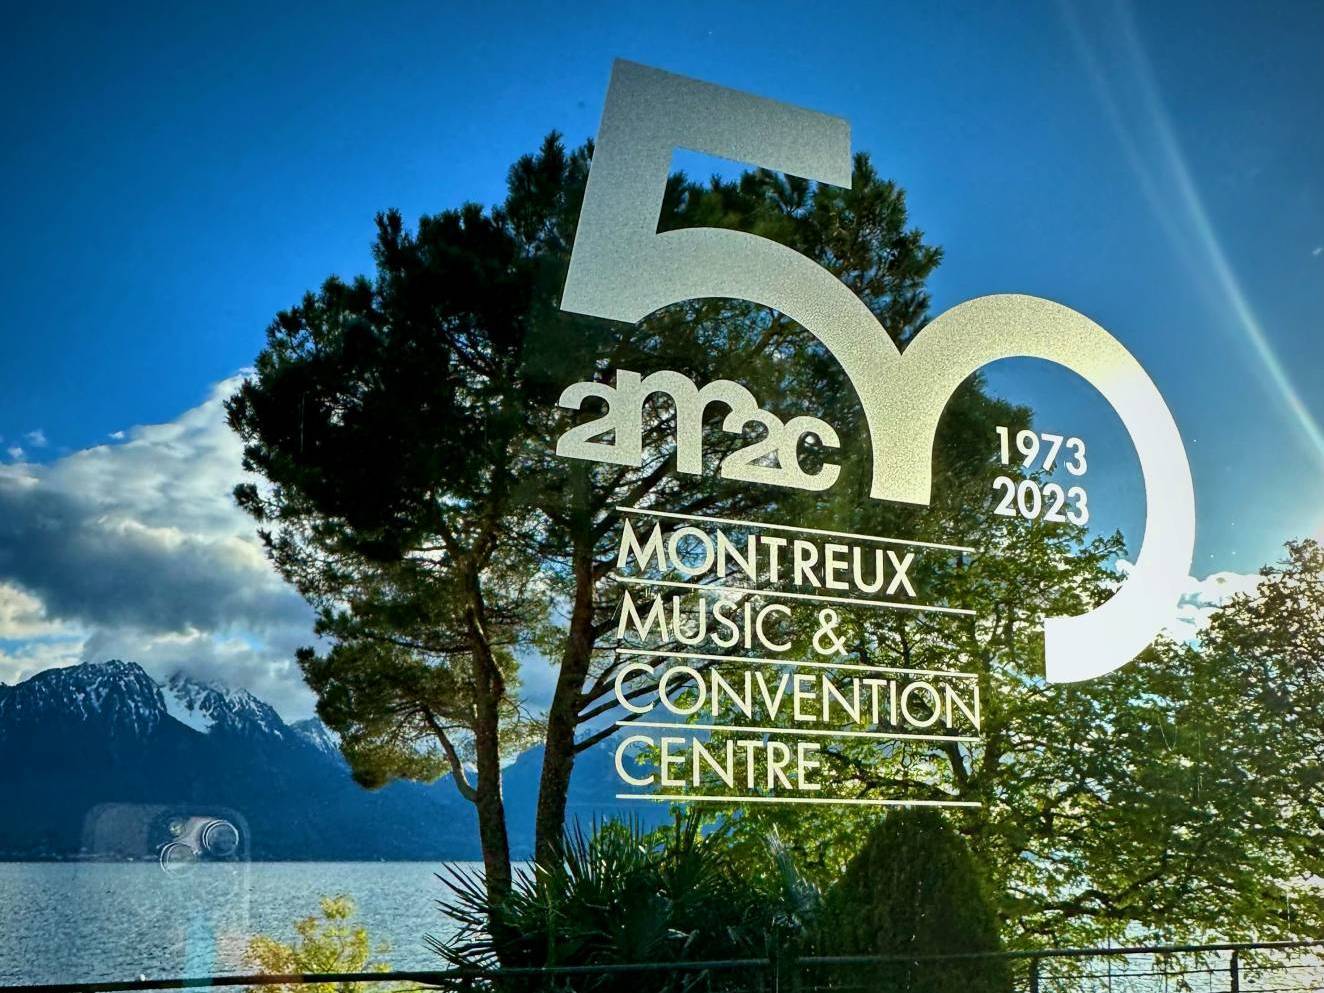 The Montreux Convention Centre (2m2c) is celebrating its 50th anniversary.